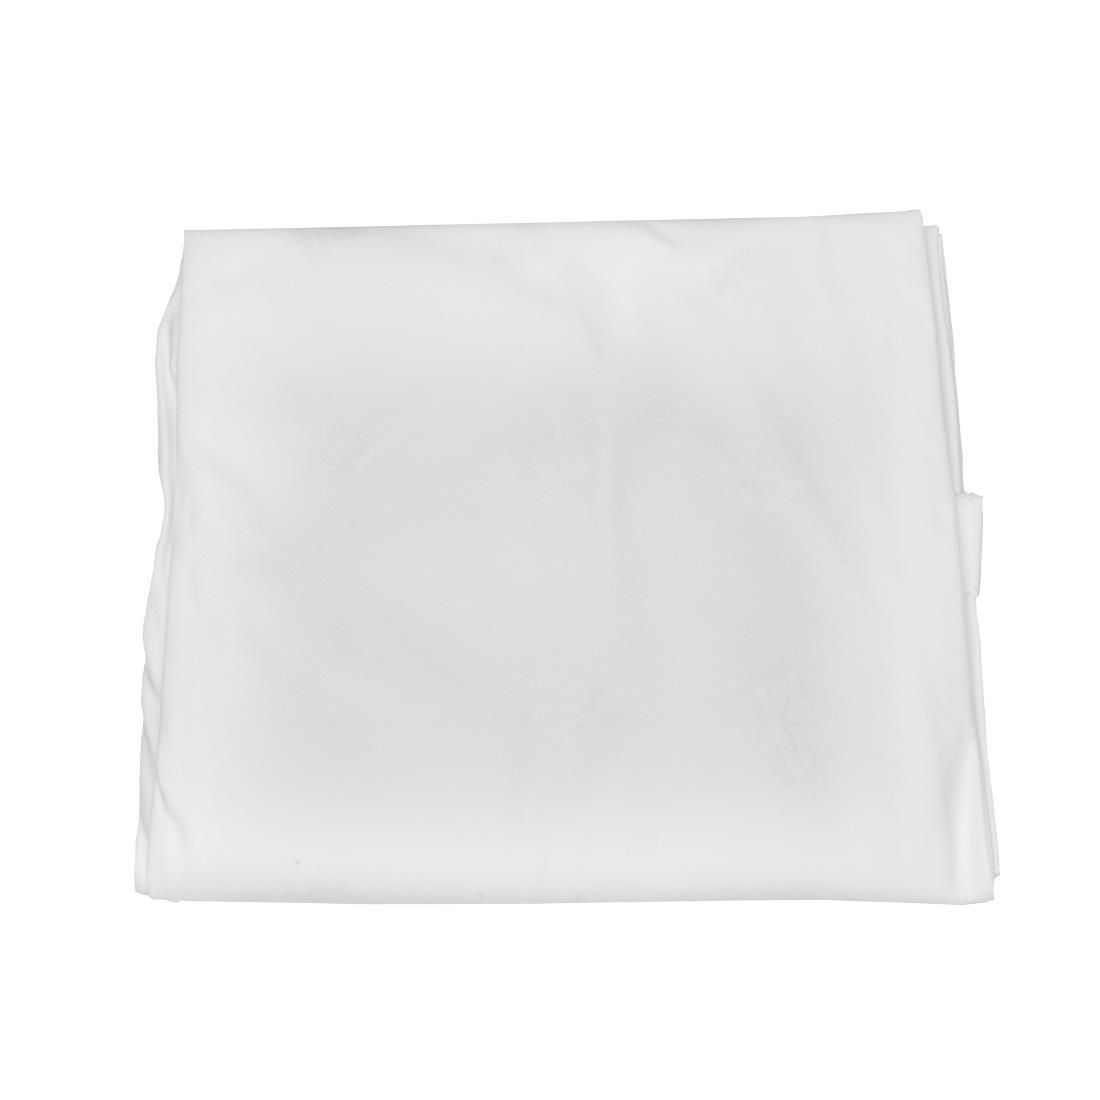 Mitre Luxury Luxor Round Tablecloth White 1725mm - HB558  - 3